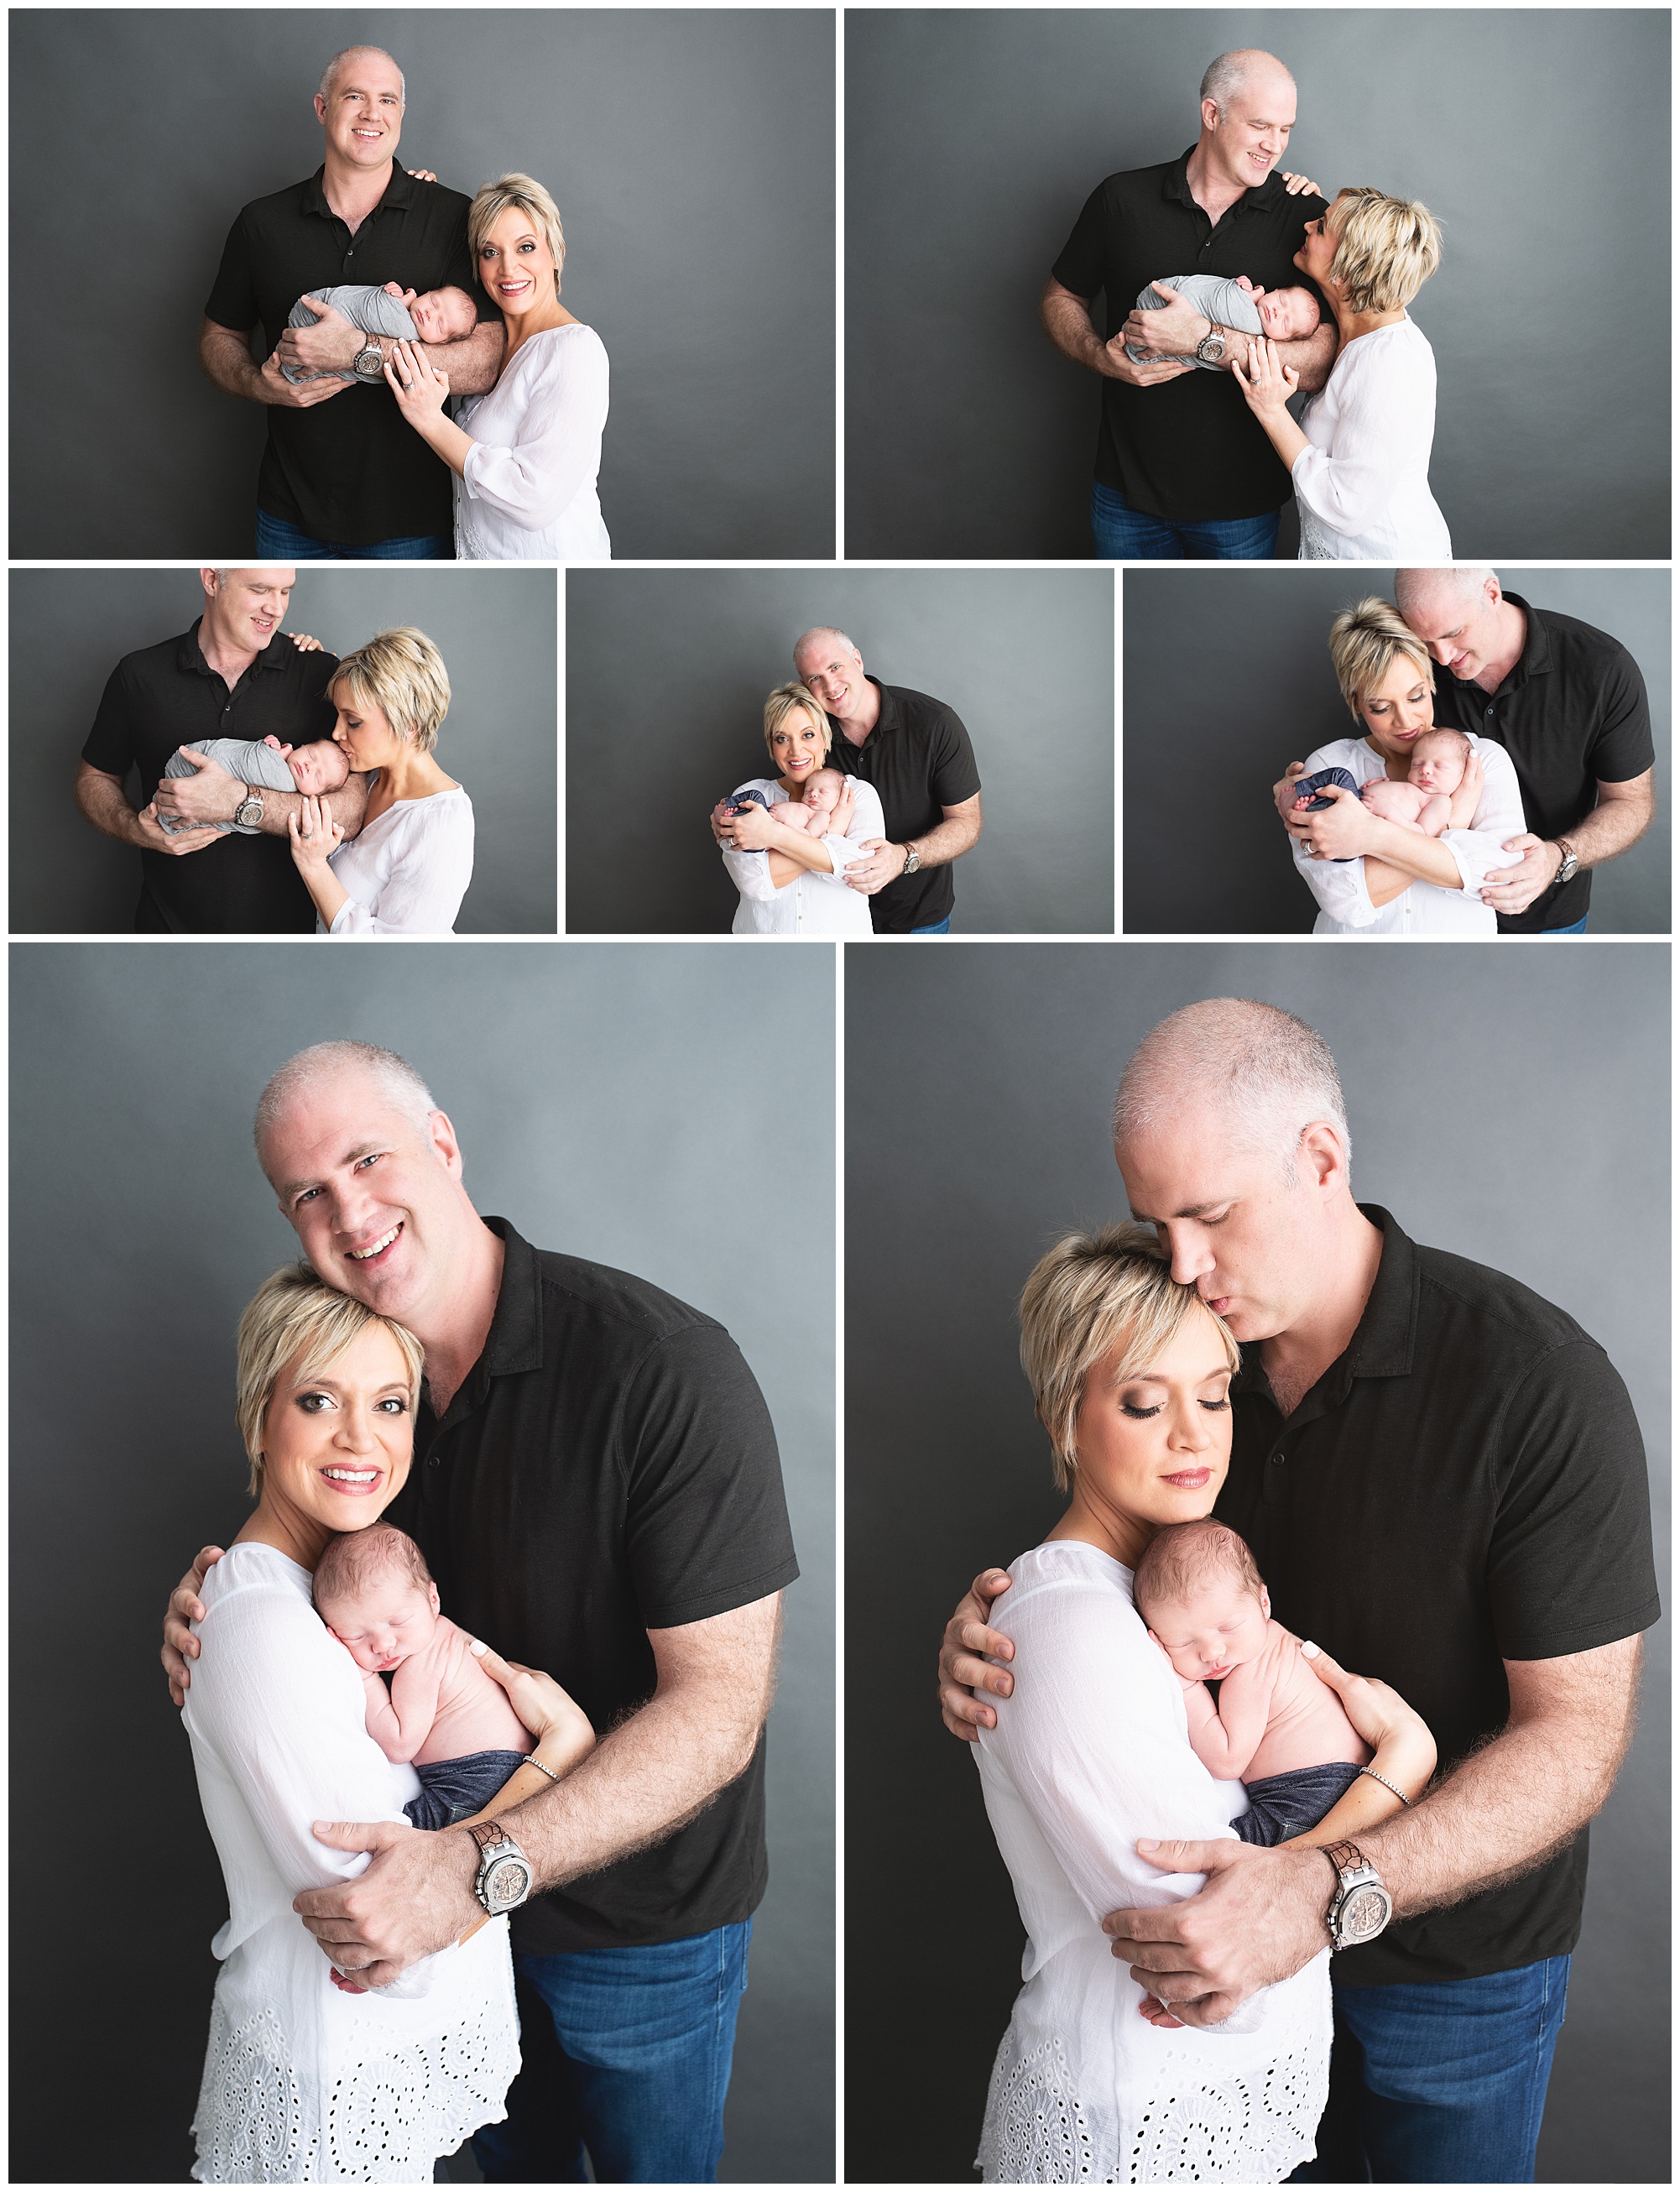 new family of three being photographed in the studio at the newborn session